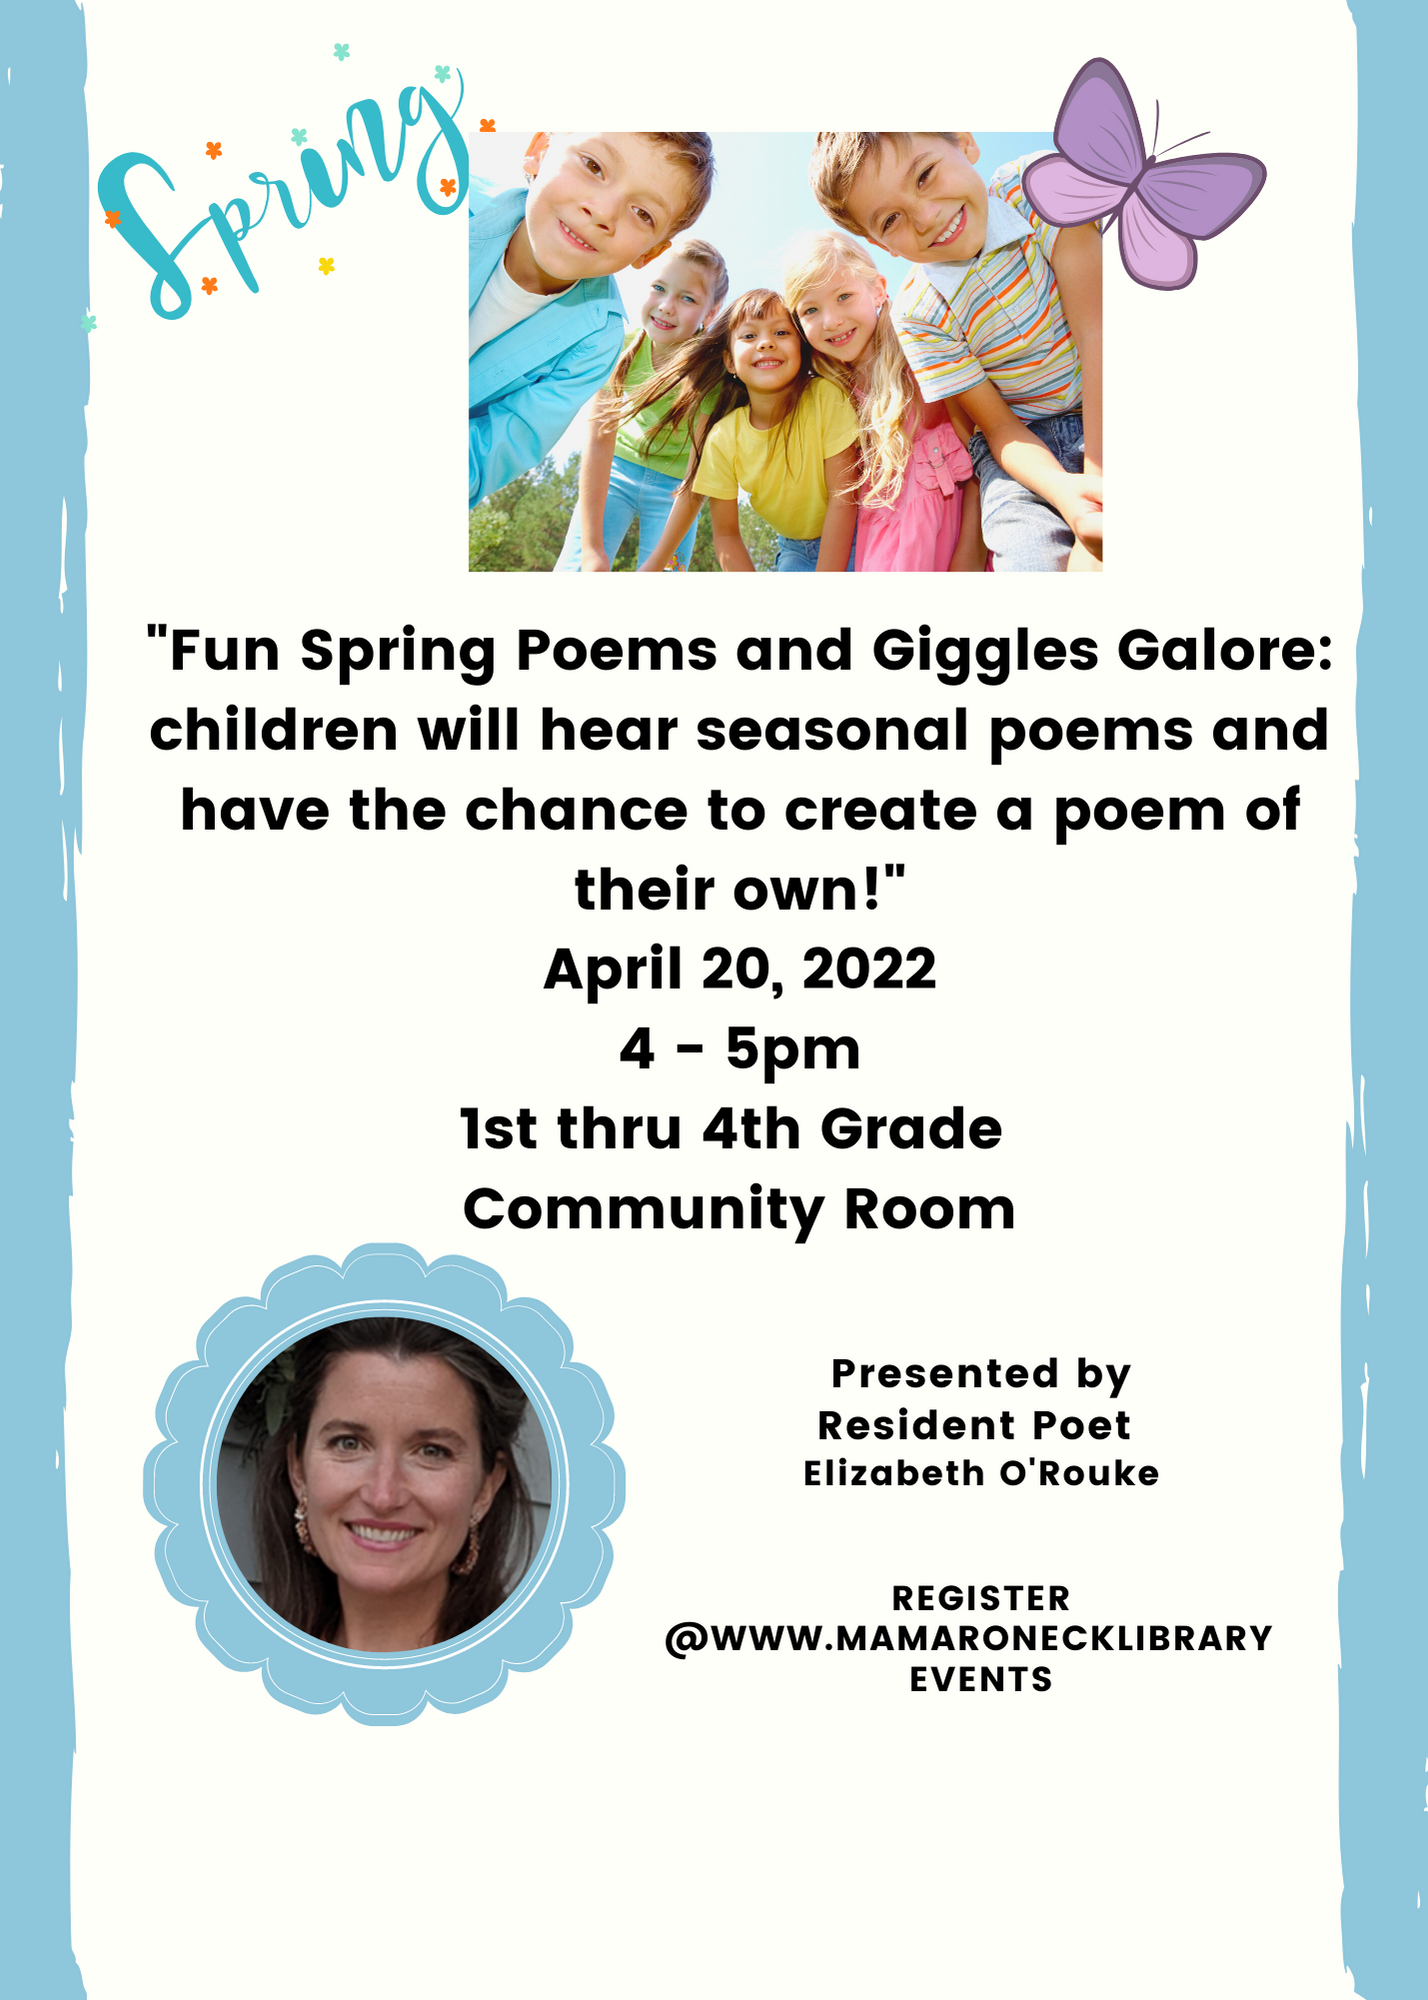 April 20 poetry program for young children